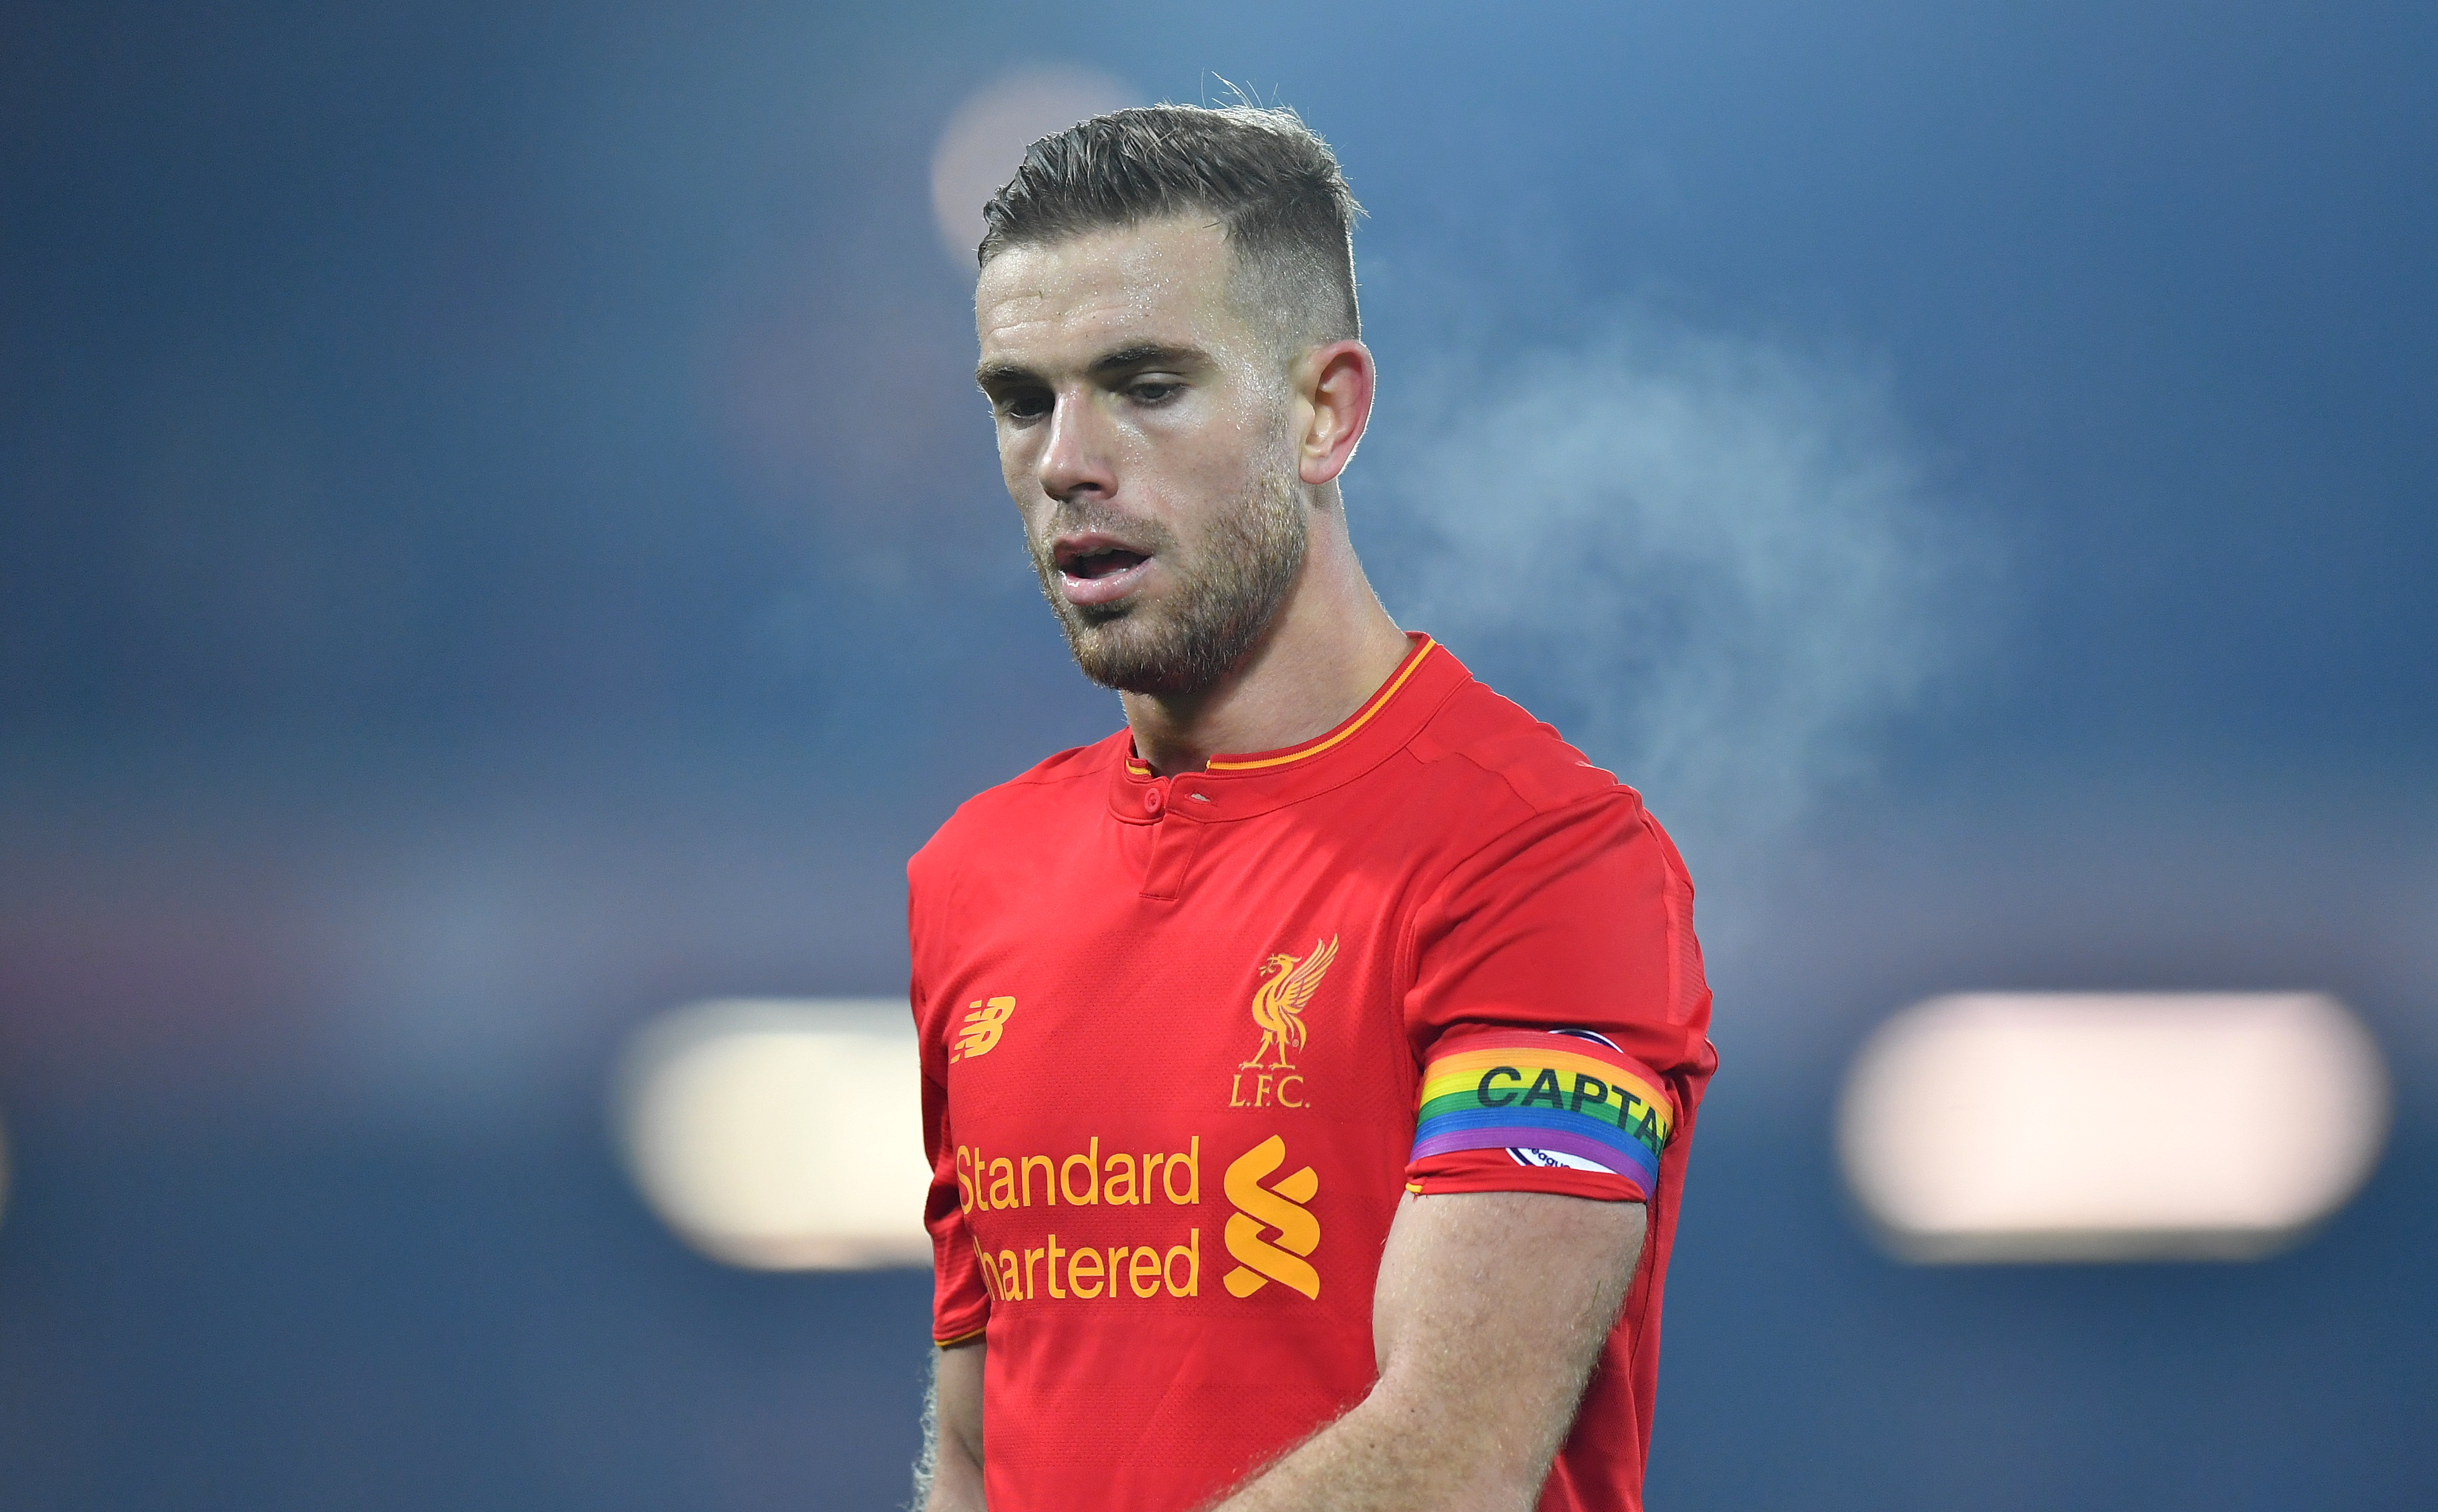 Former Liverpool captain Jordan Henderson wore the rainbow armband in support of the LGBTQ+ community